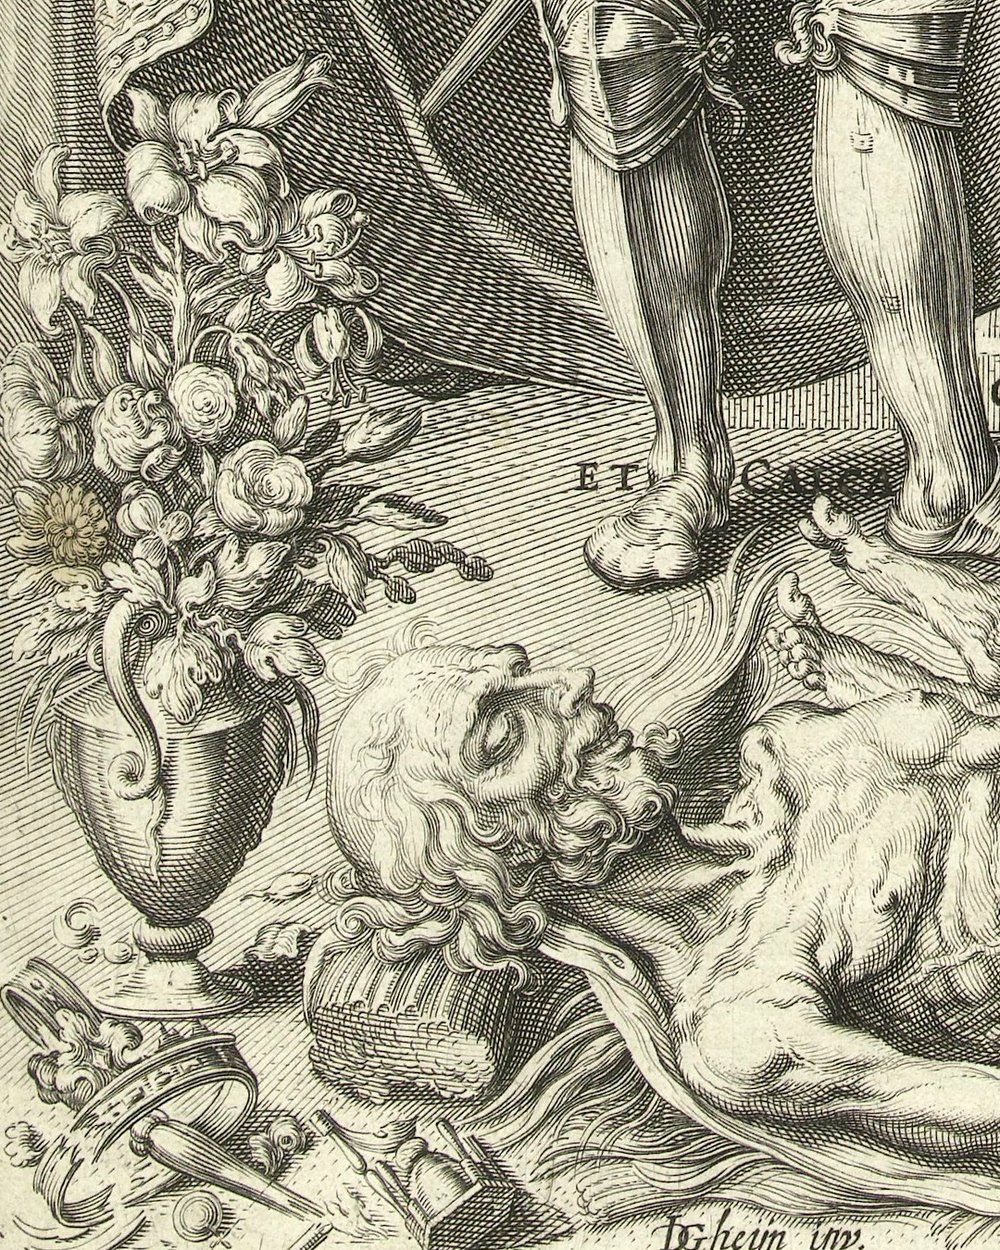 "Allegory of death and the transience of life" (1601)